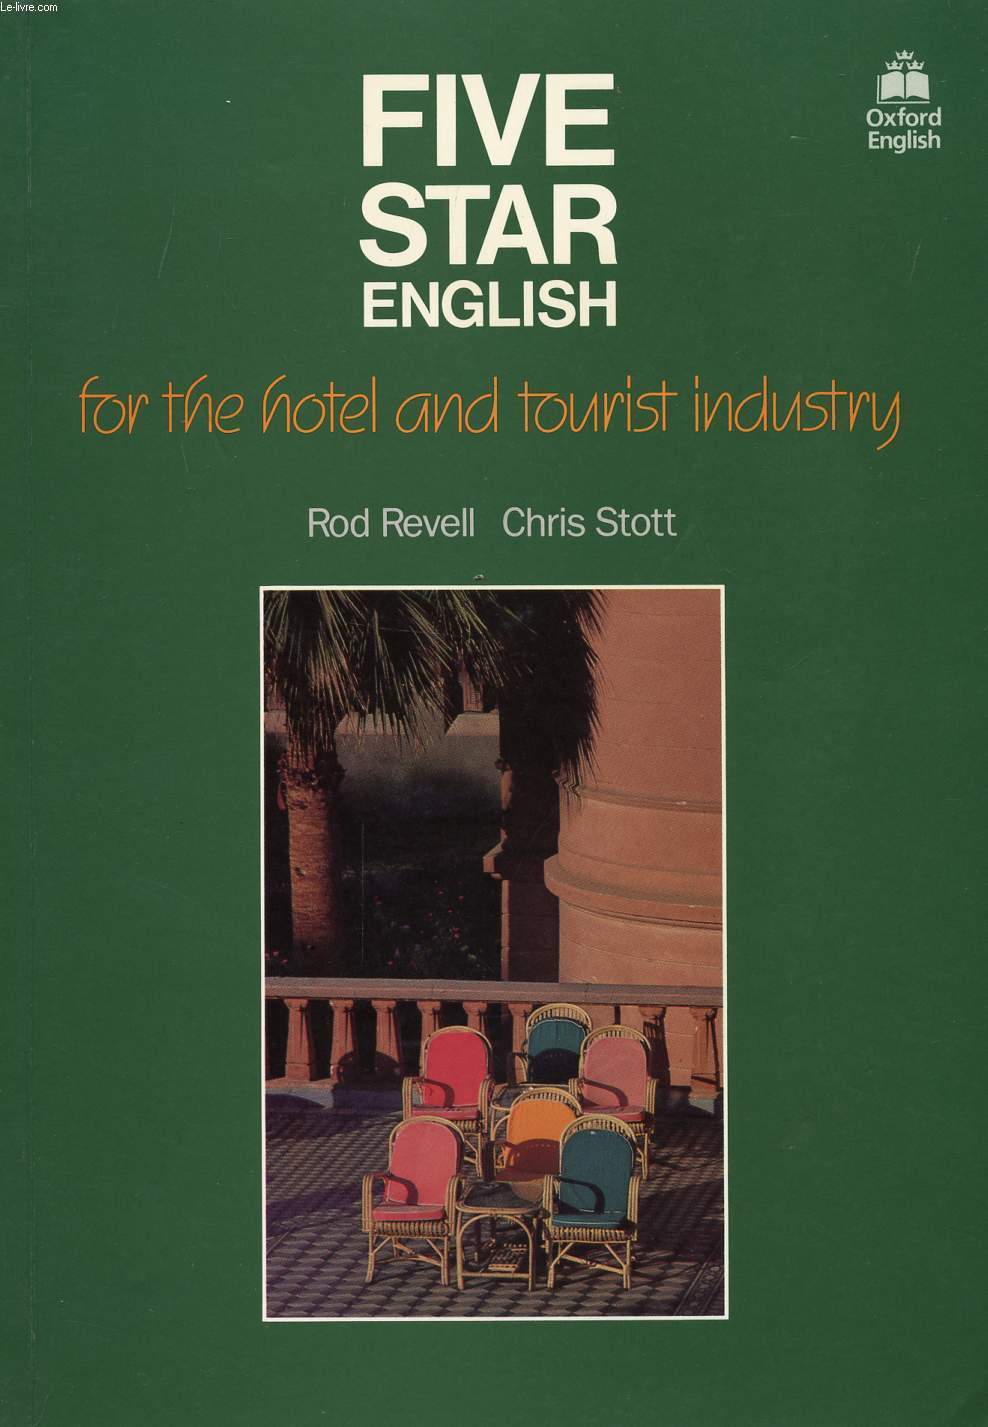 FIVE STAR ENGLISH, FOR THE HOTEL AND TOURIST INDUSTRY